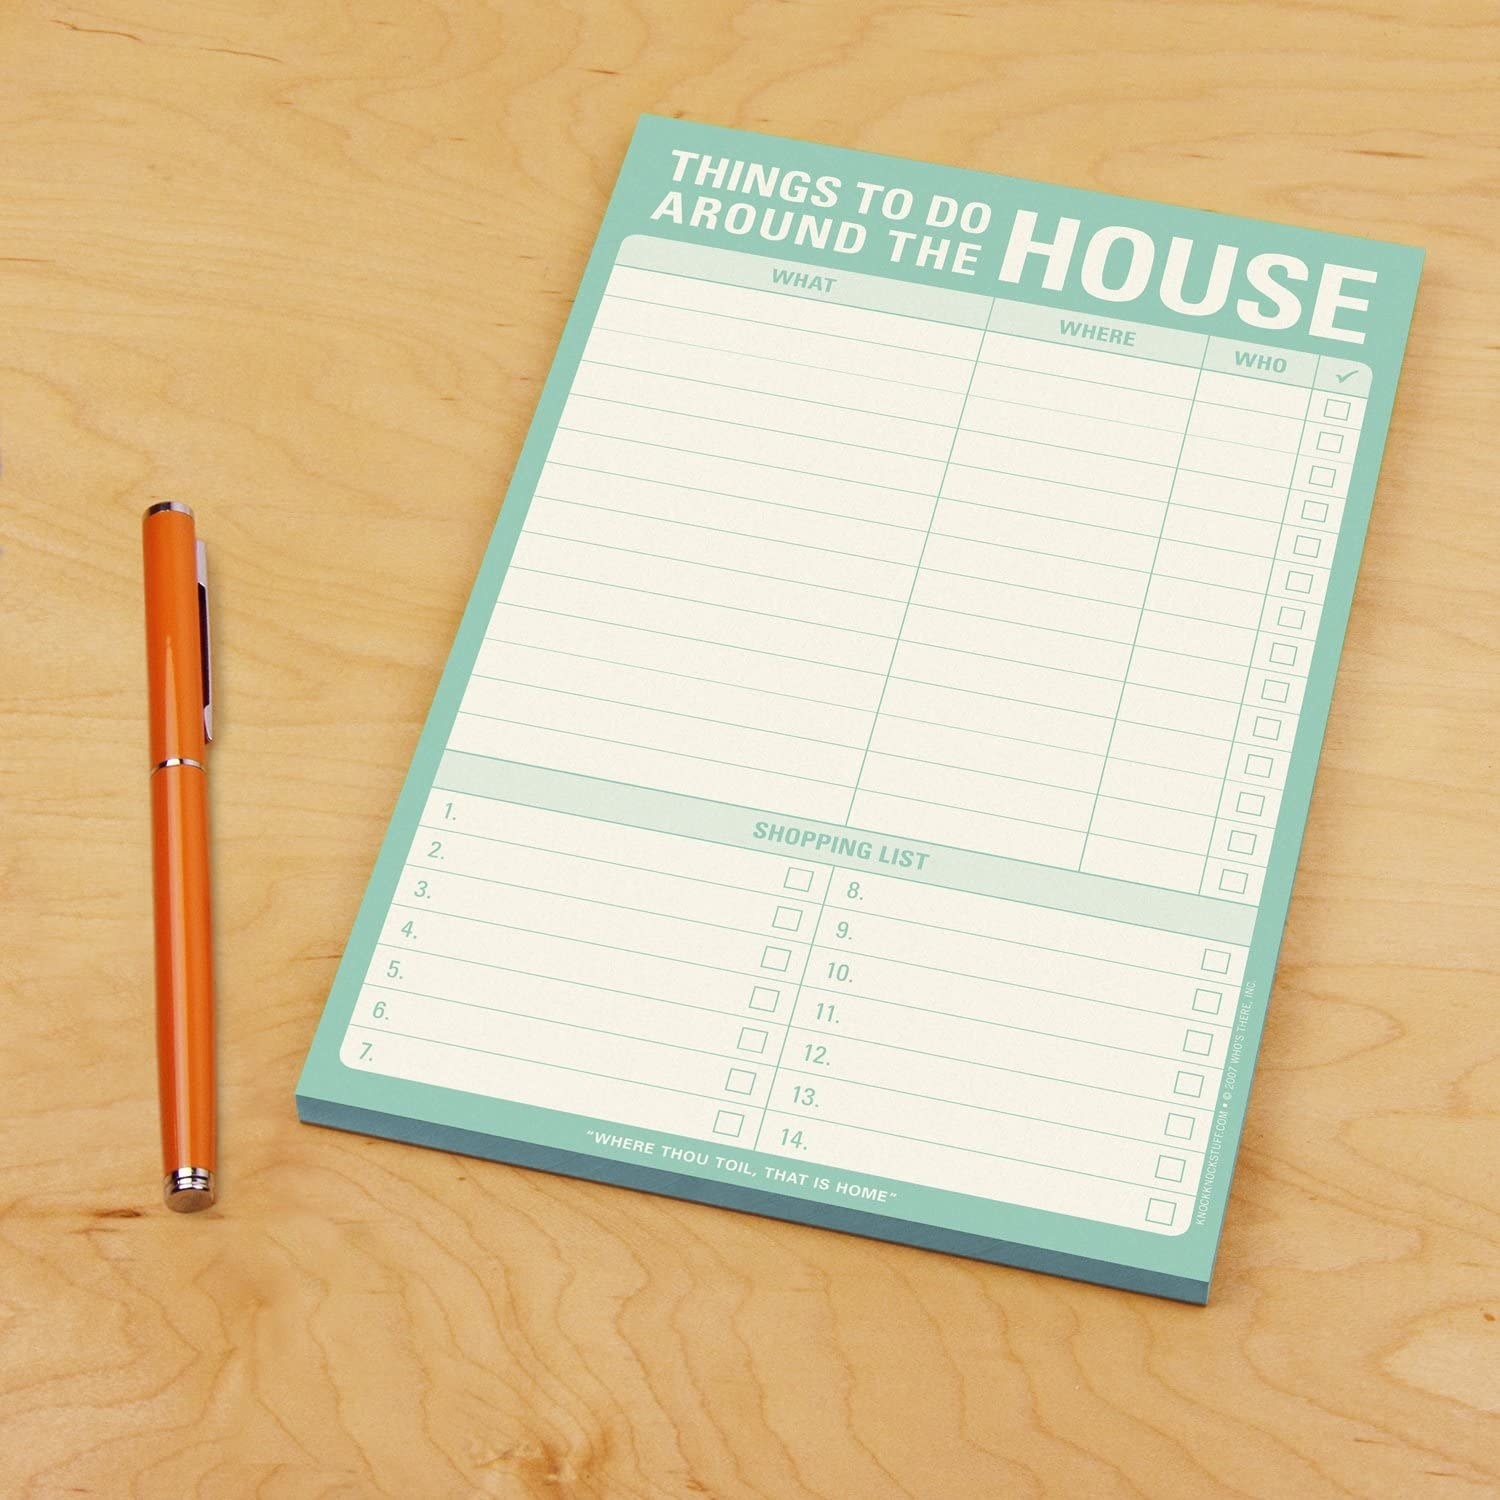 A chore checklist on a table with a pen next to it